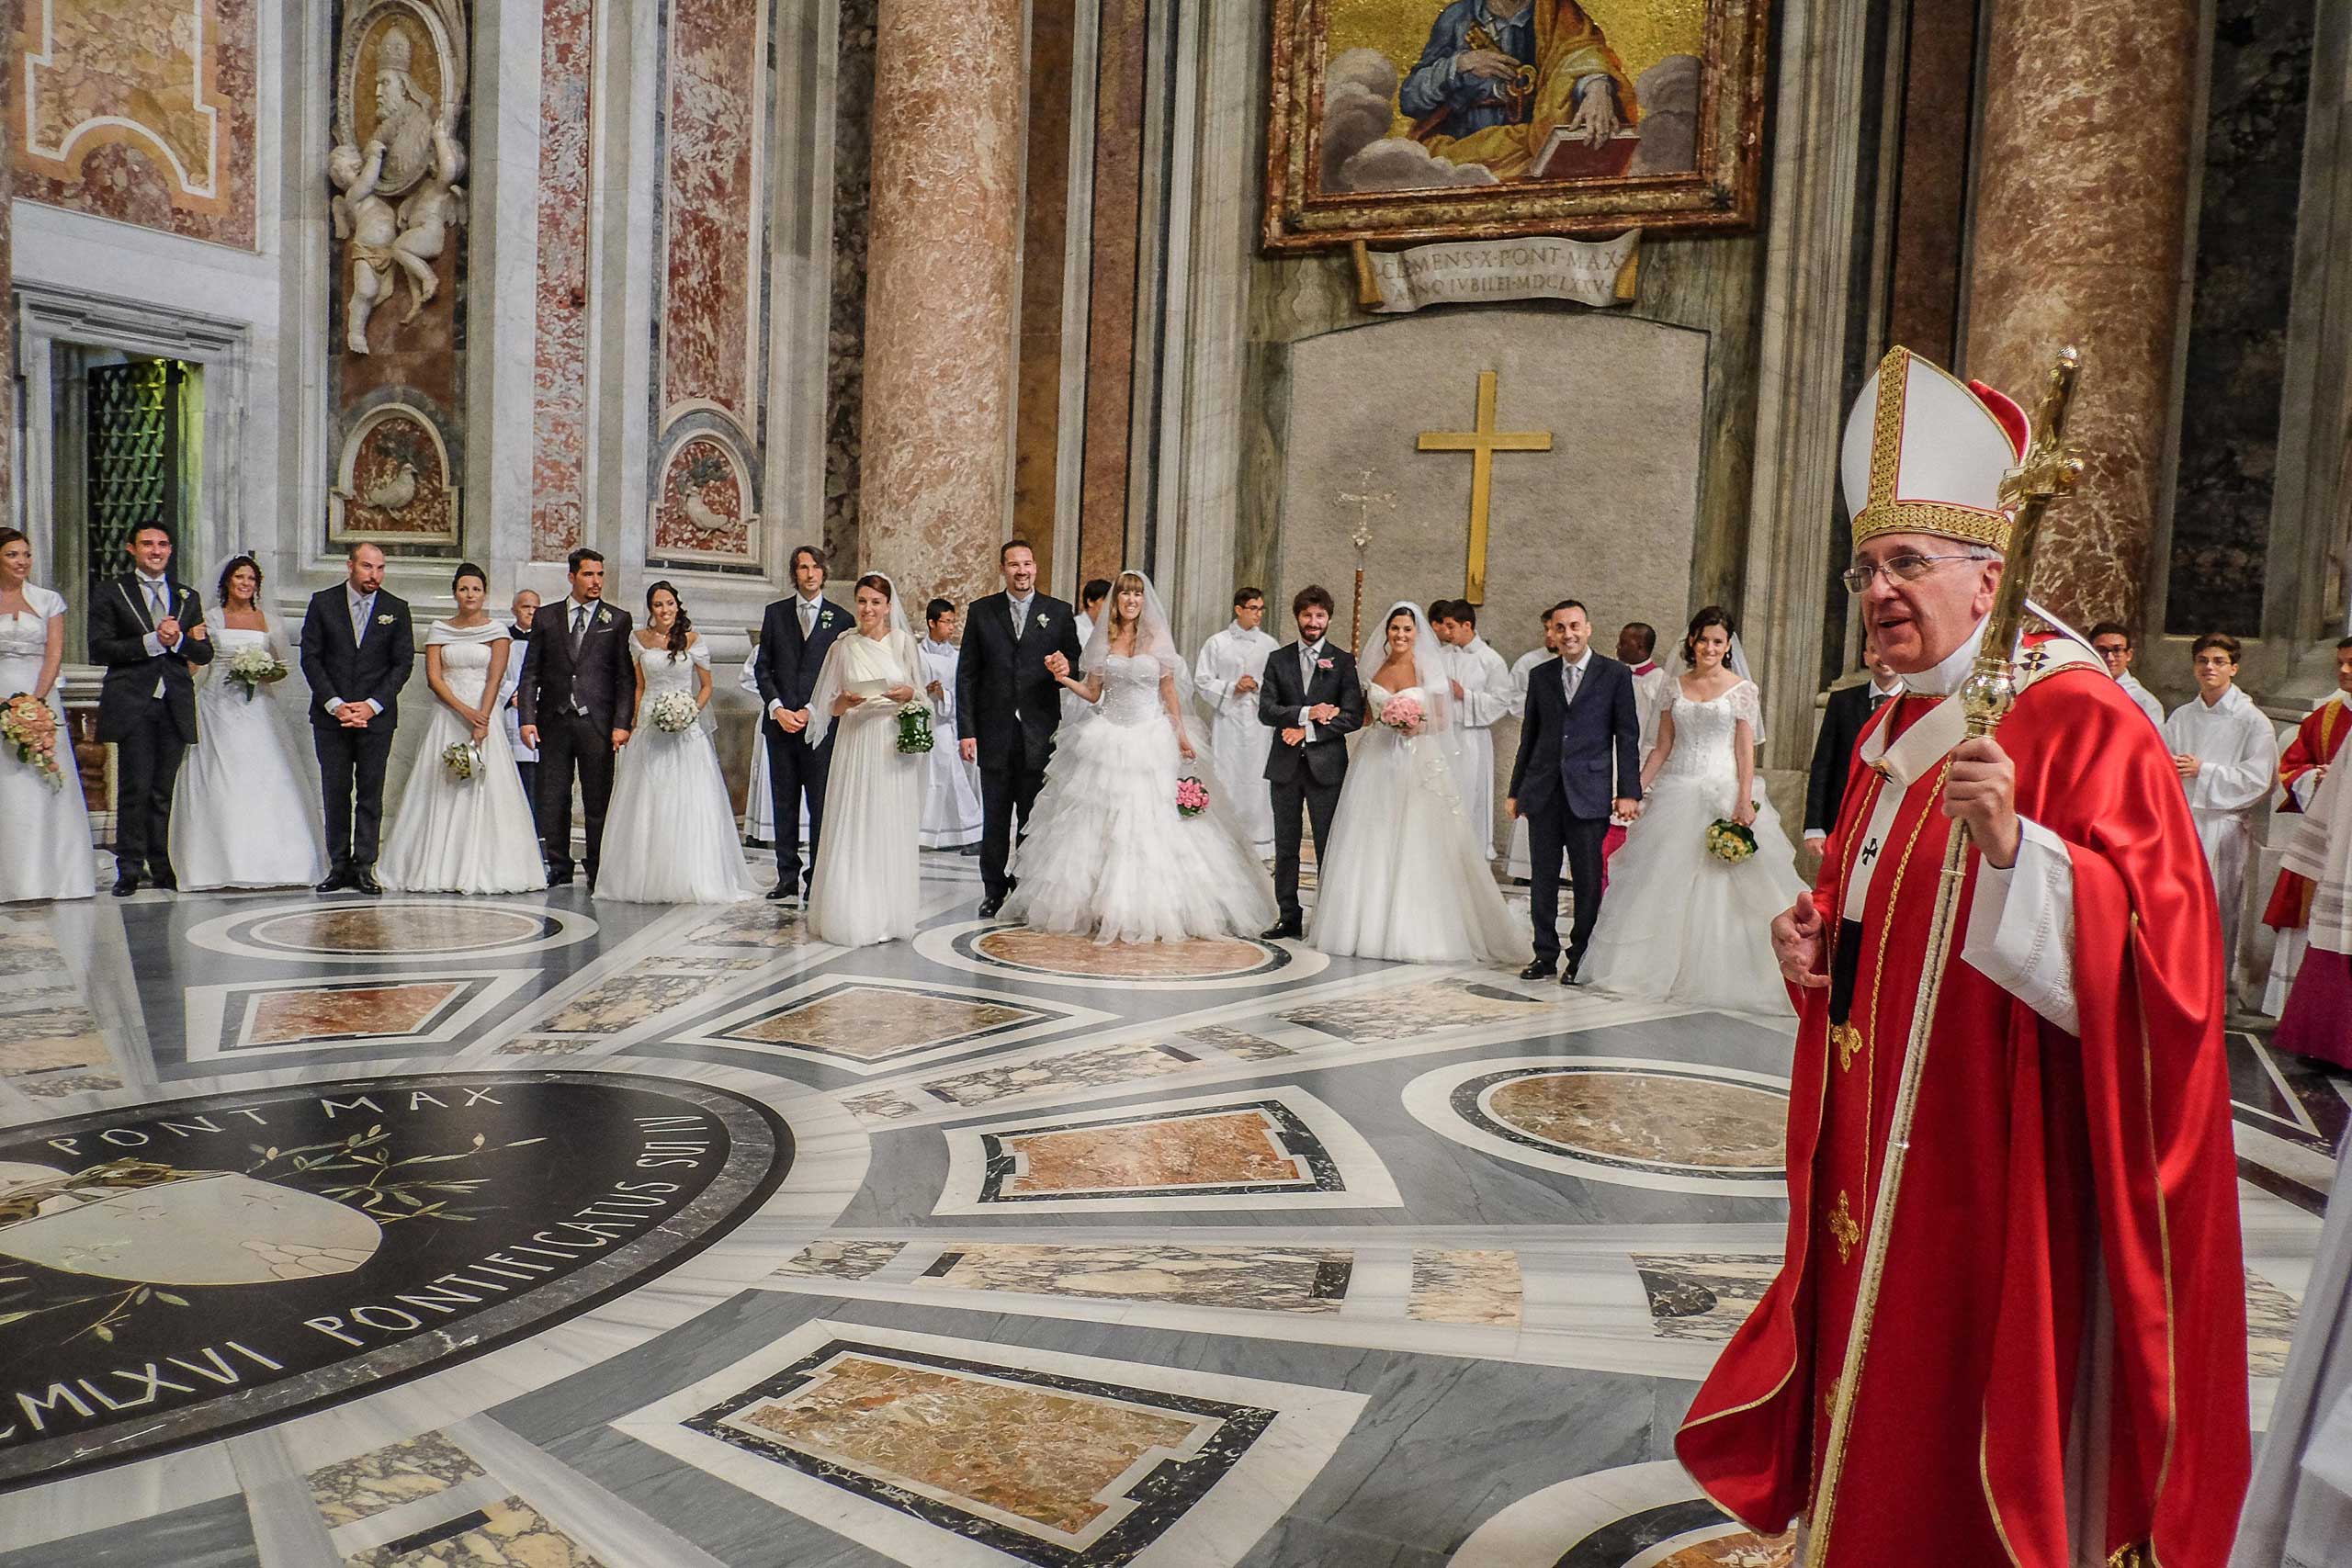 Pope Francis celebrates the wedding of 20 couples in St. Peter's Basilica in Vatican City, Italy on Sept. 14, 2014.